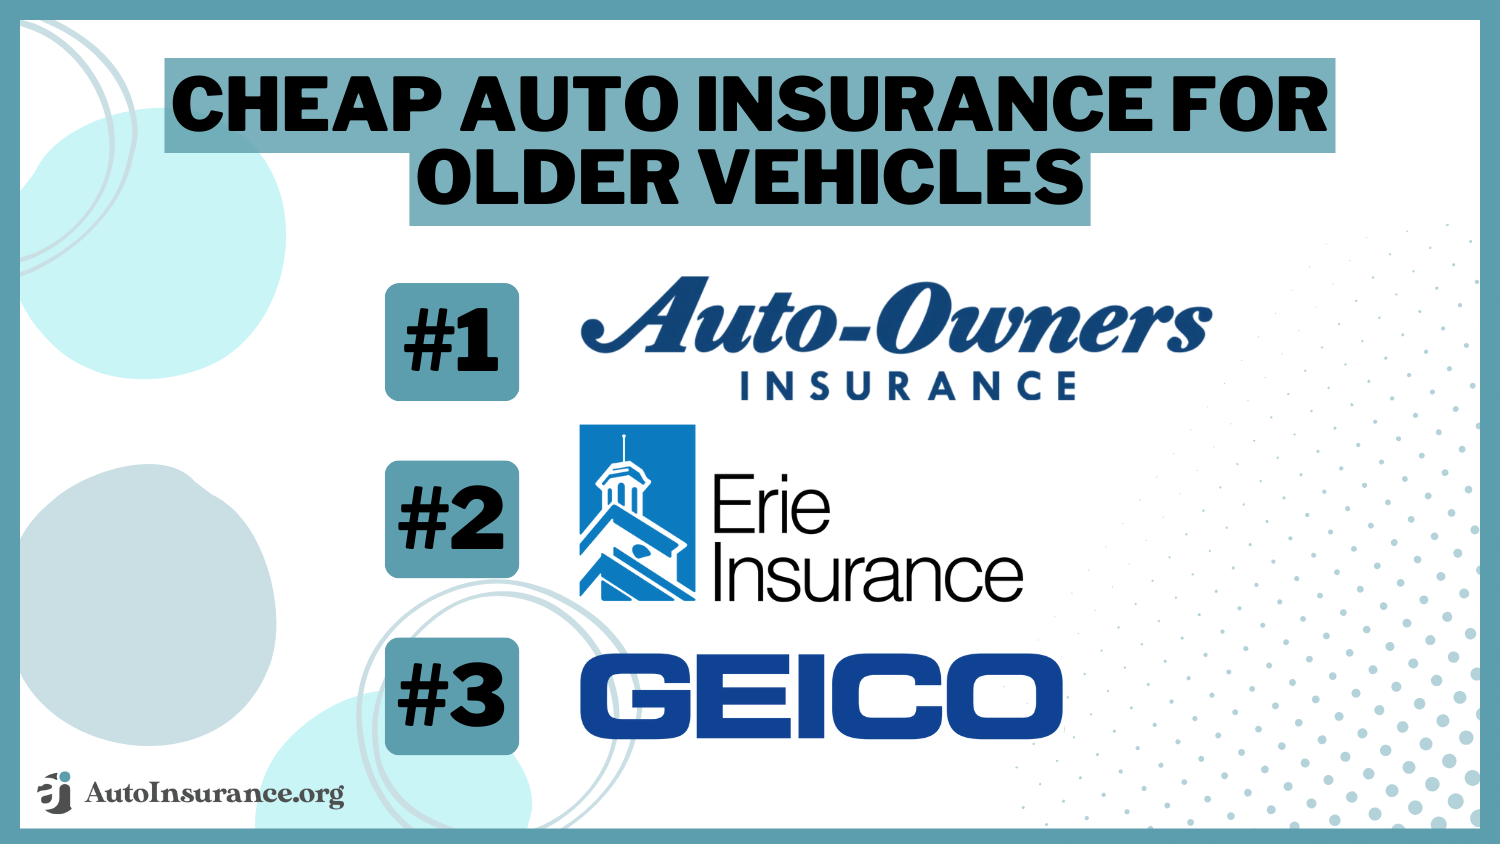 Cheap Auto Insurance for Older Vehicles - Auto-Owners, Erie, Geico